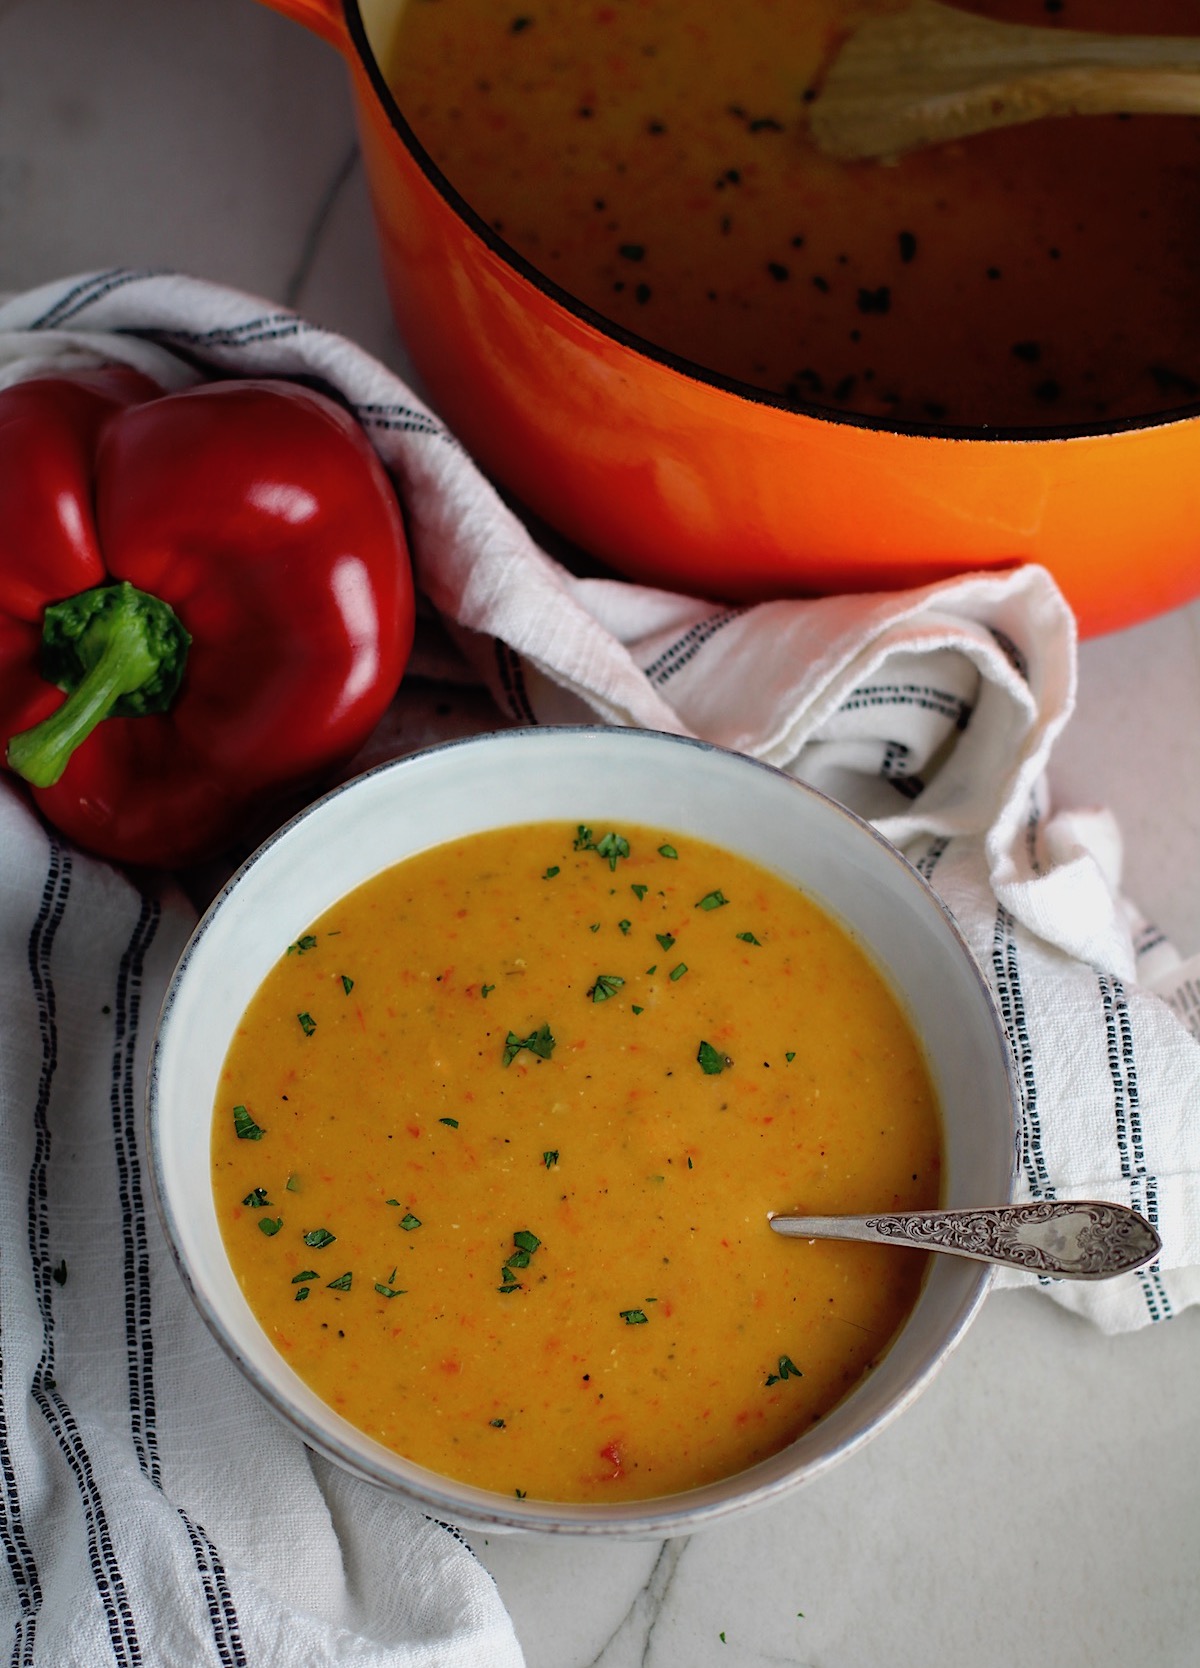 Creamy Red Pepper and Lentil Soup in a bowl with spoon and pot in background. Whole red pepper next to bowl. This is an easy and hearty lunch or dinner!  It comes together in just 40 minutes.